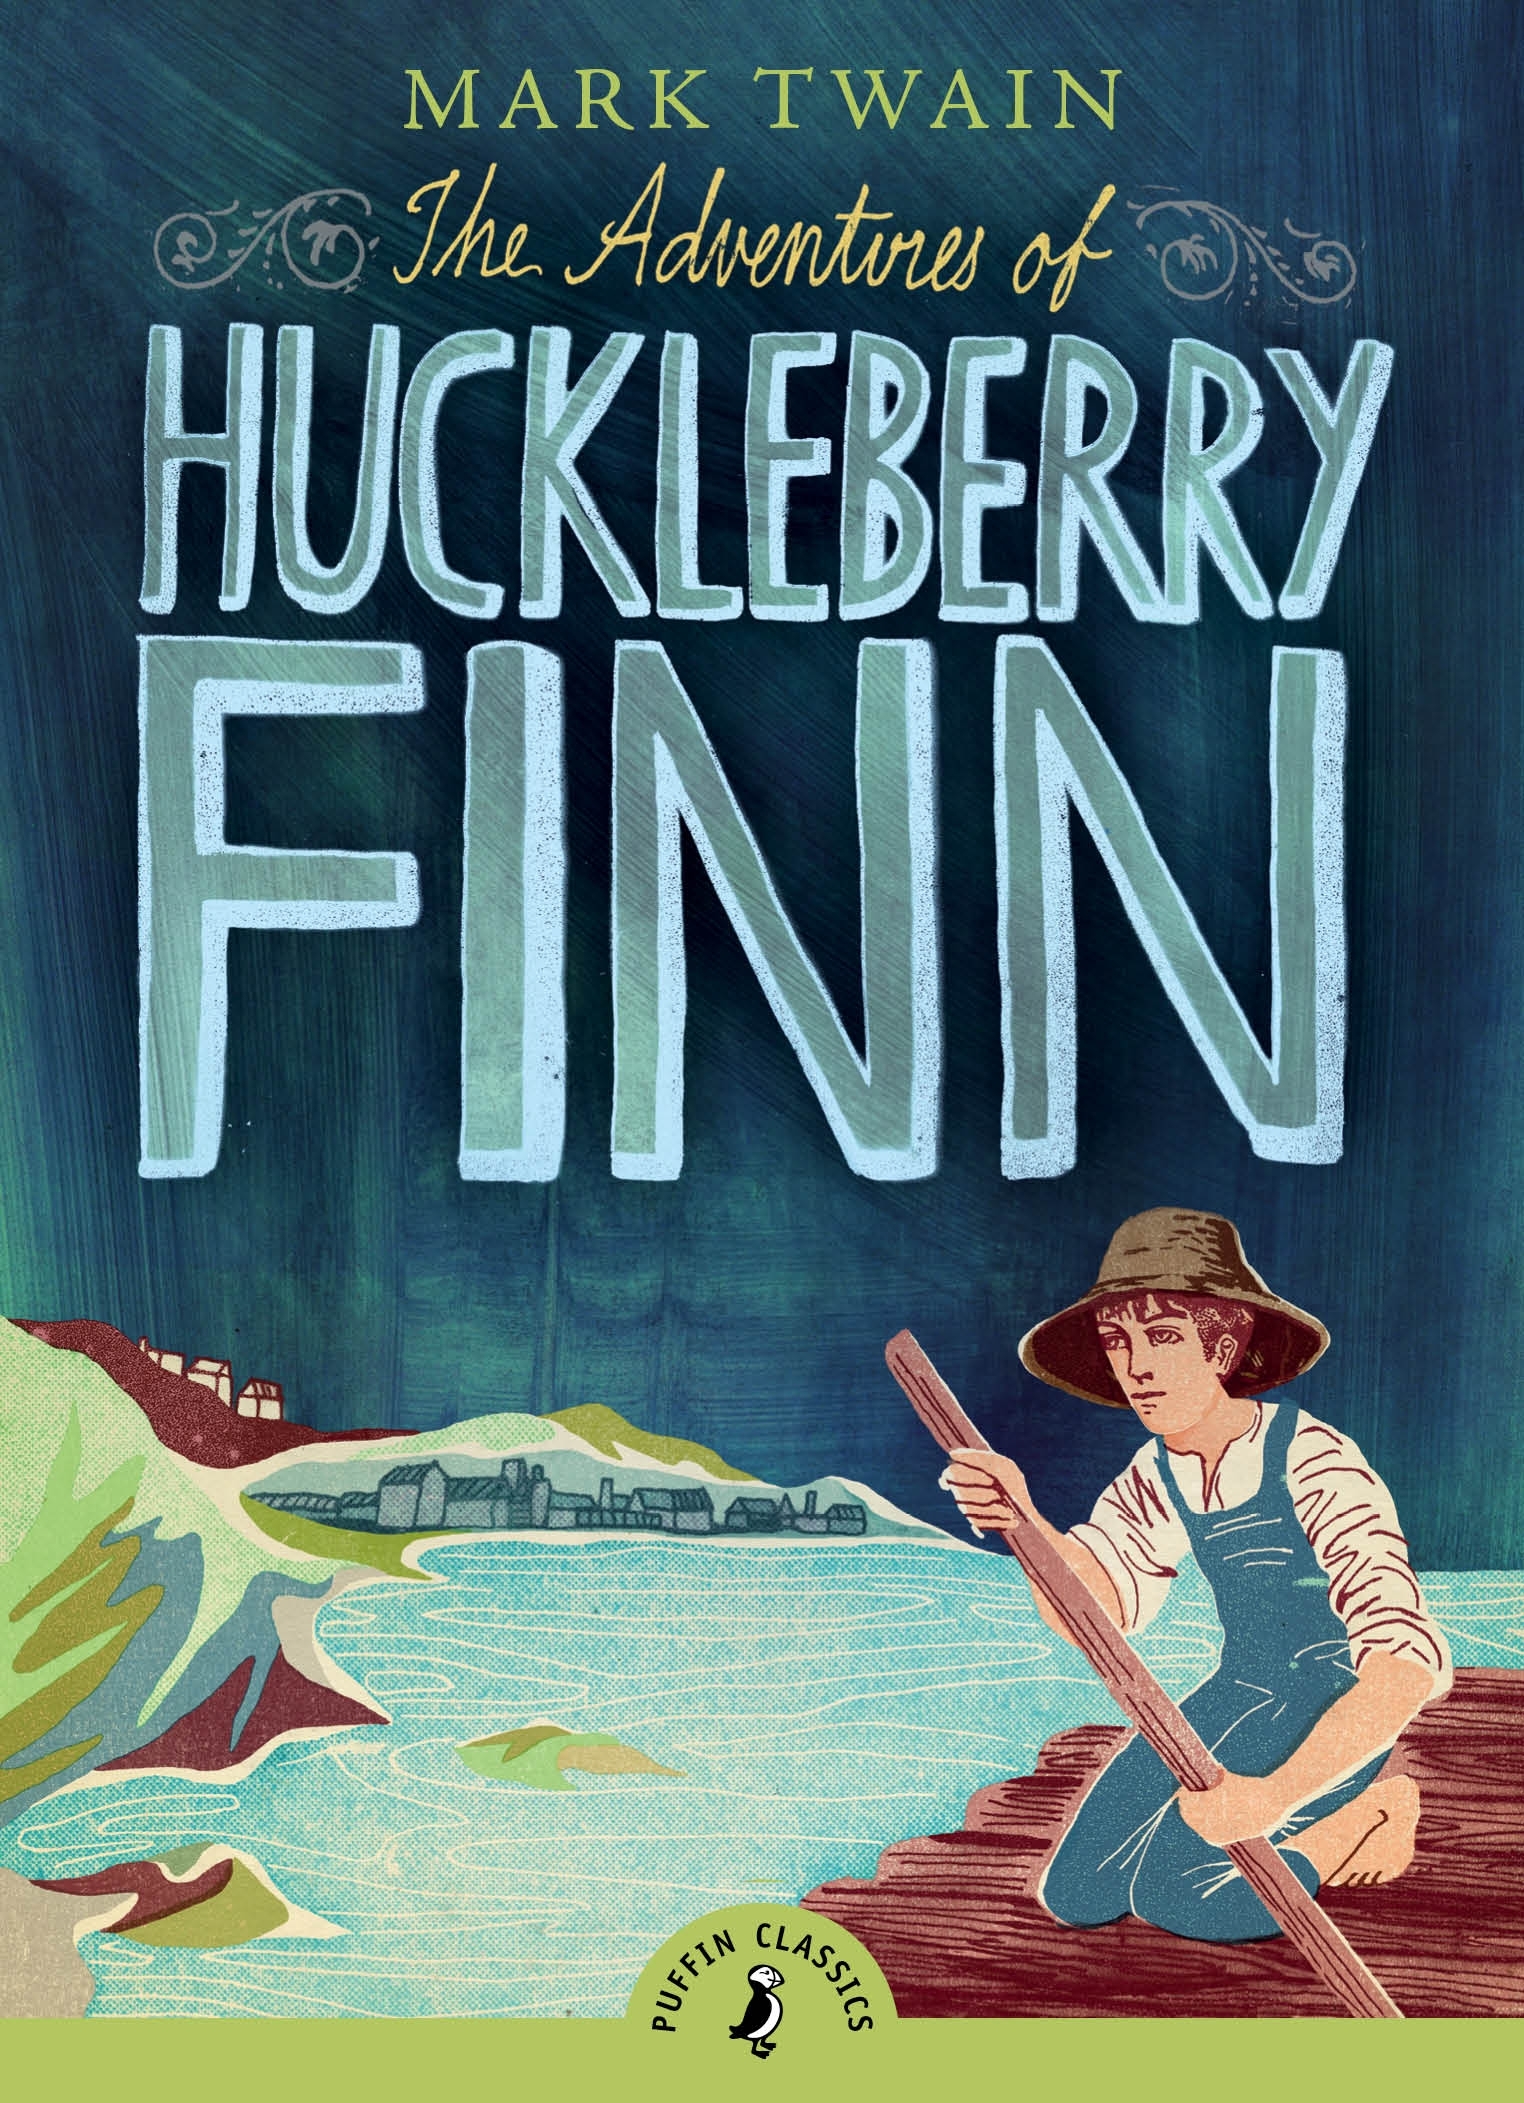 download the new The Adventures of Huckleberry Finn